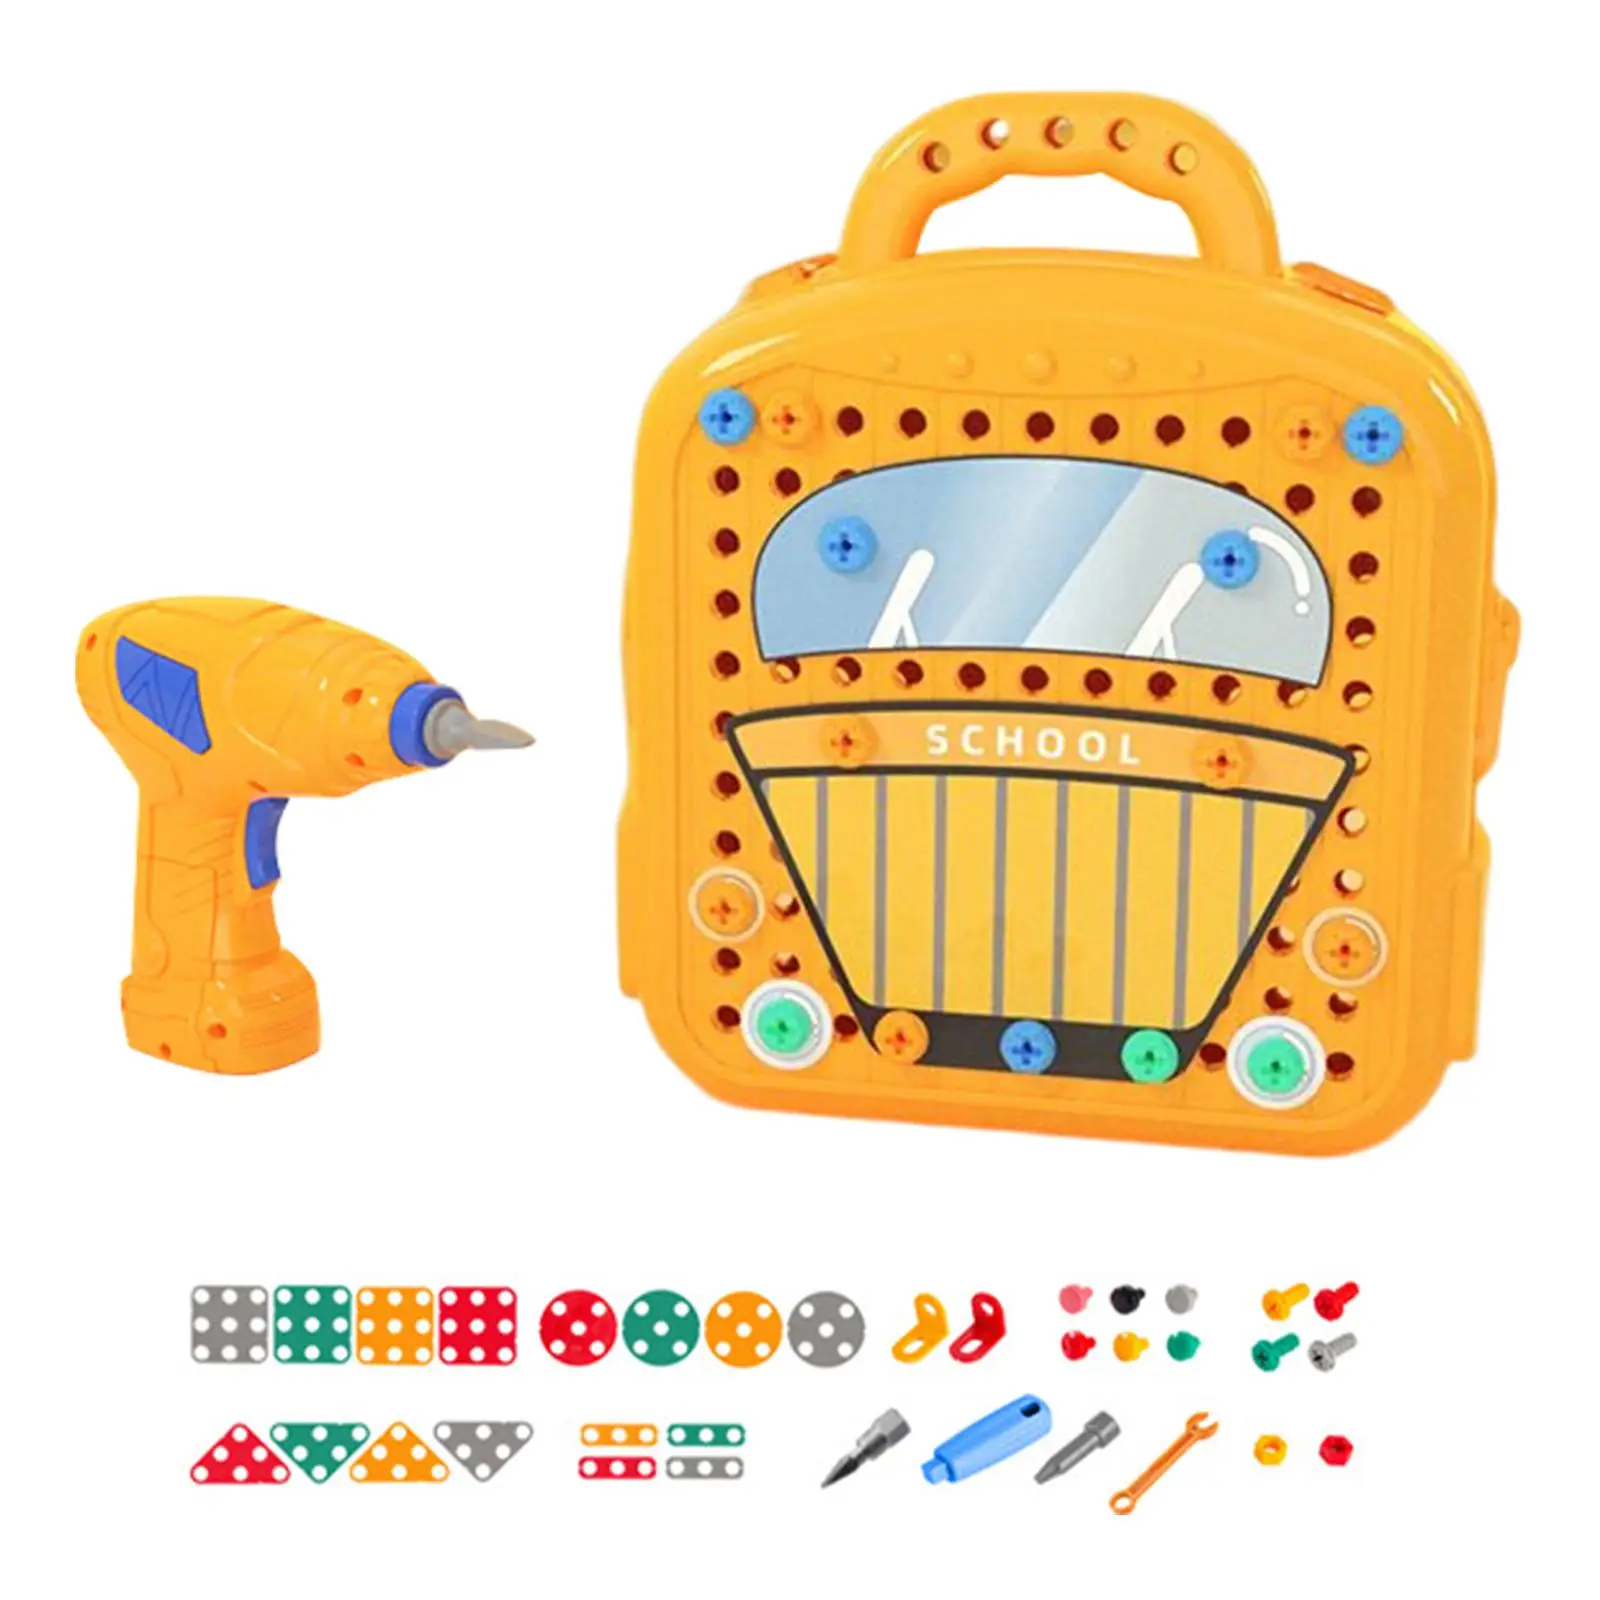 Drill Set Educational Toys Engineering Building Blocks for Ages 3-10 Years Old Gifts